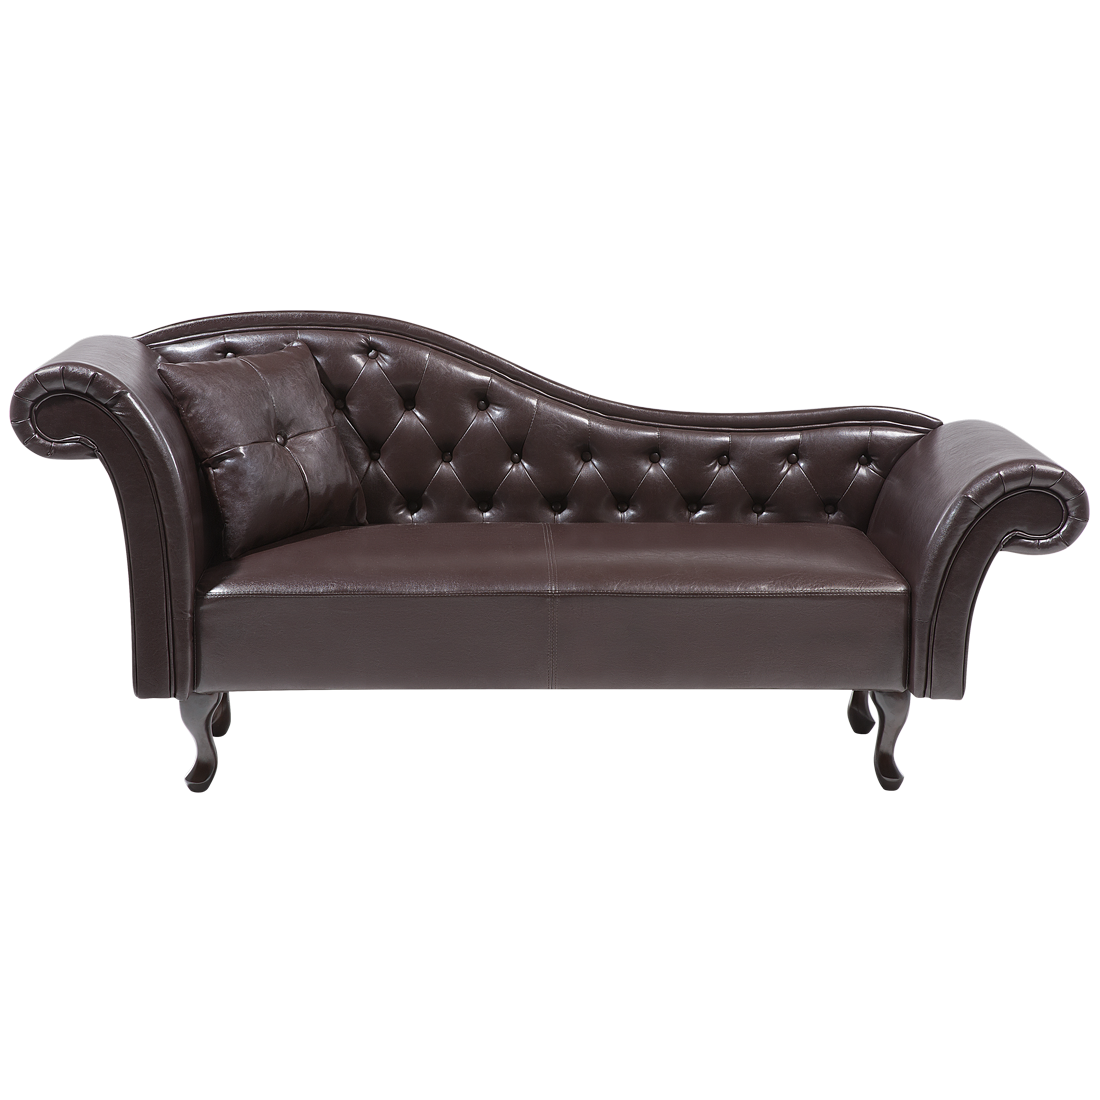 Beliani Chaise Lounge Brown Faux Leather Button Tufted Upholstery Left Hand Rolled Arms with Cushion